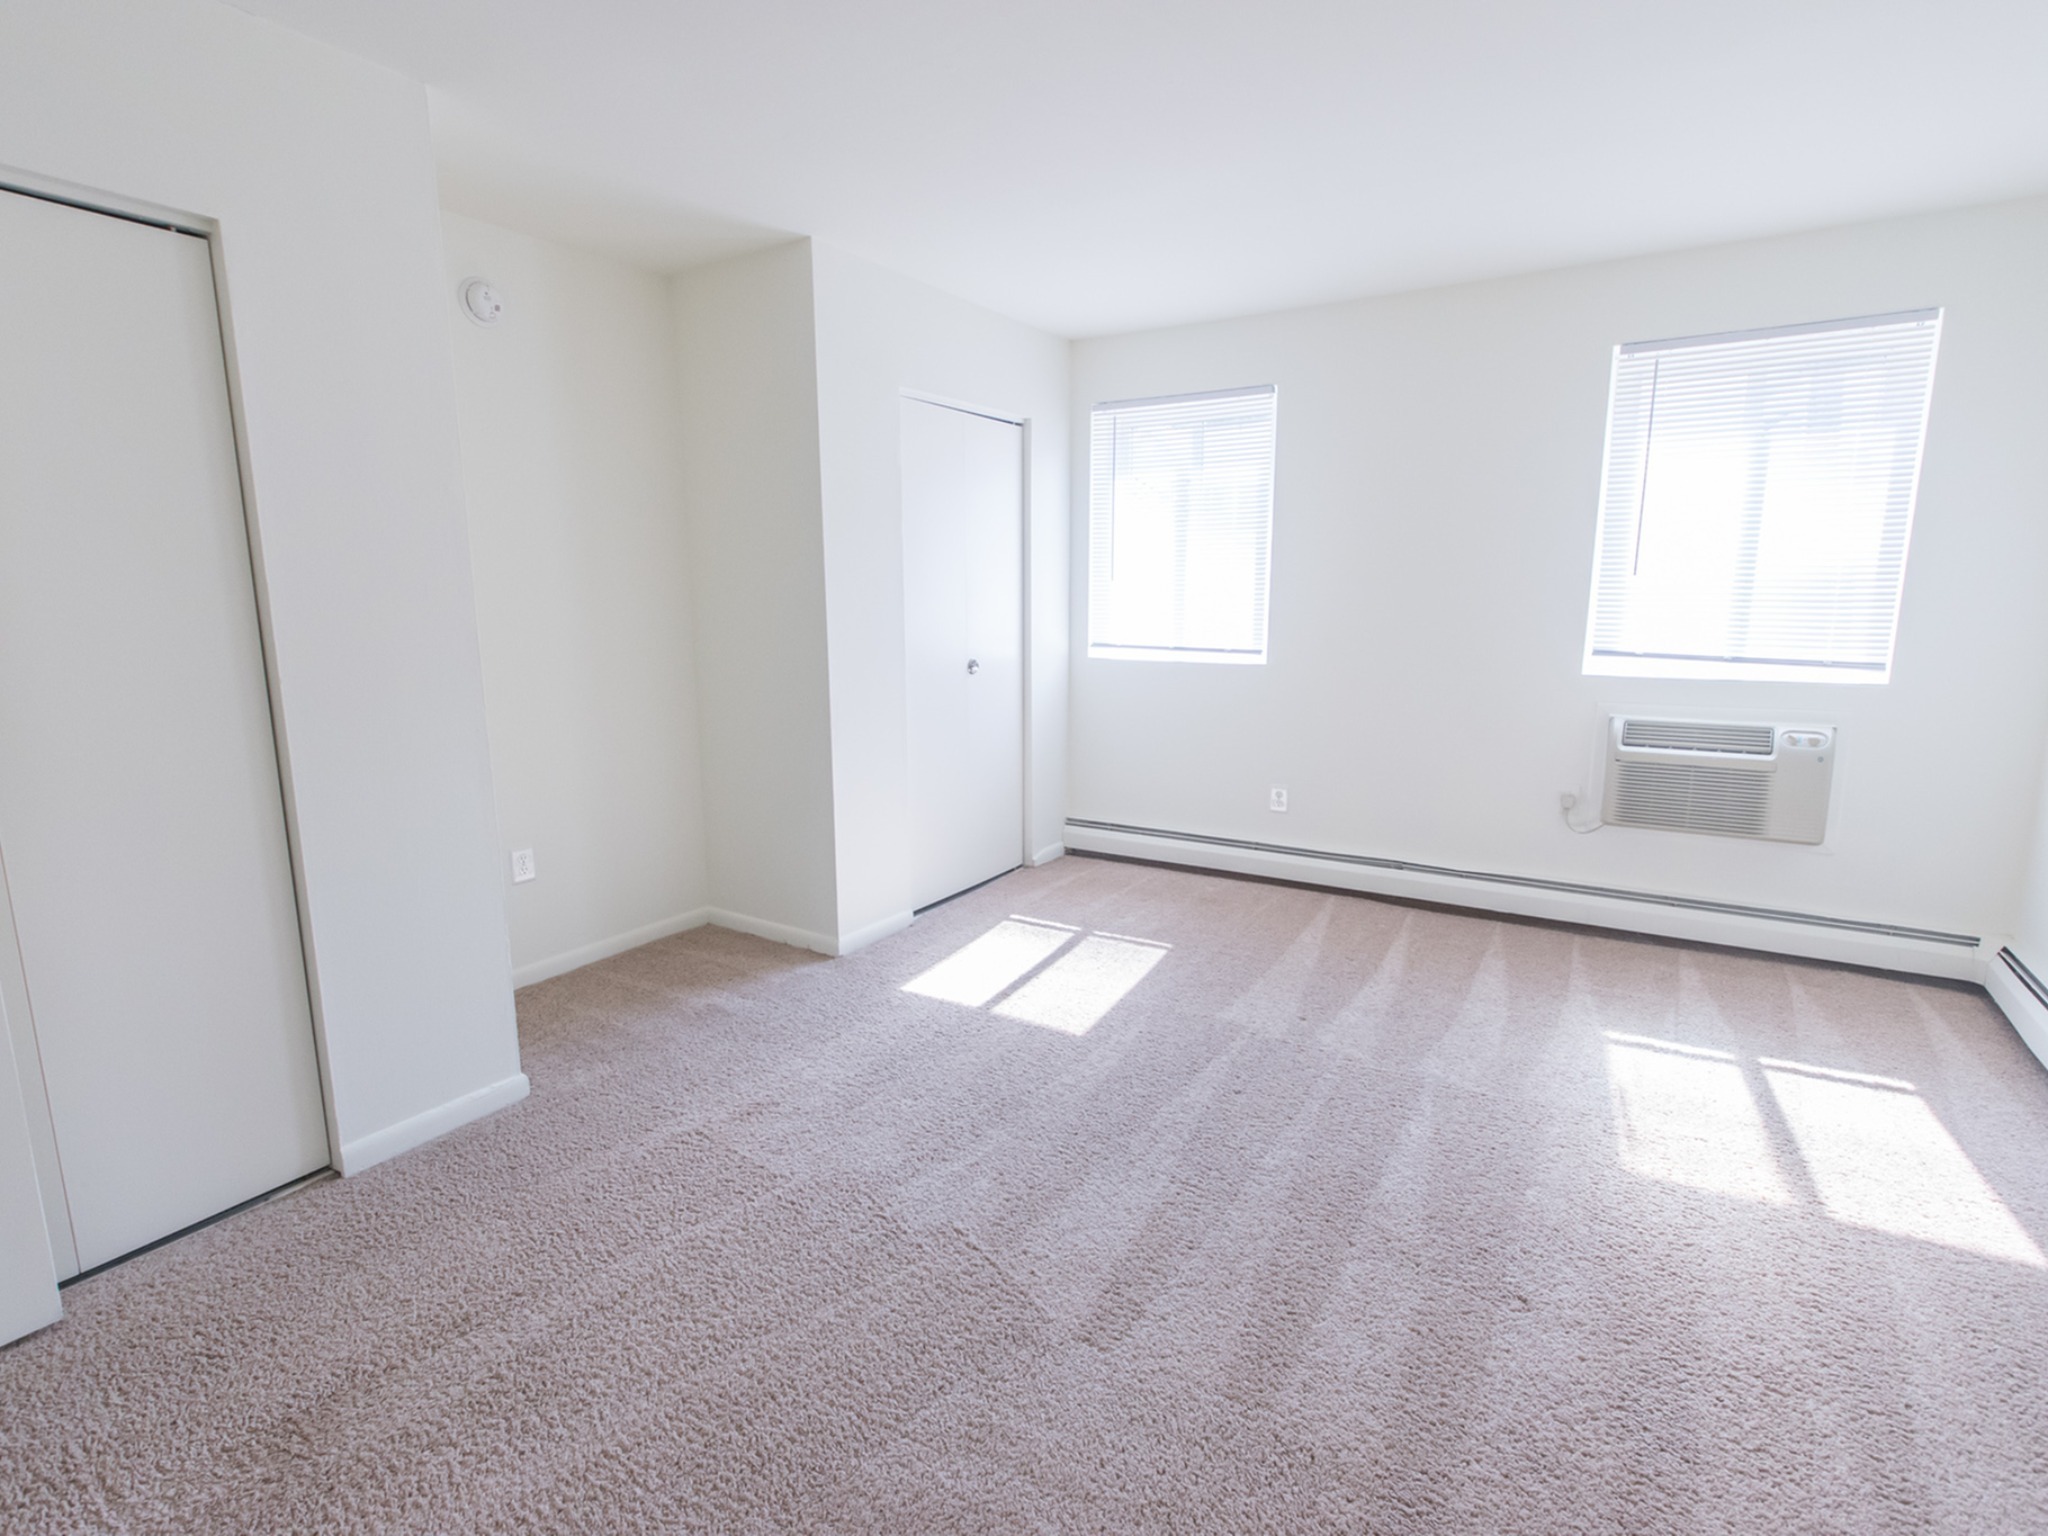 The bedroom area of an apartment unfurnished, fitted with carpet flooring, spacious closet, and an A/C unit